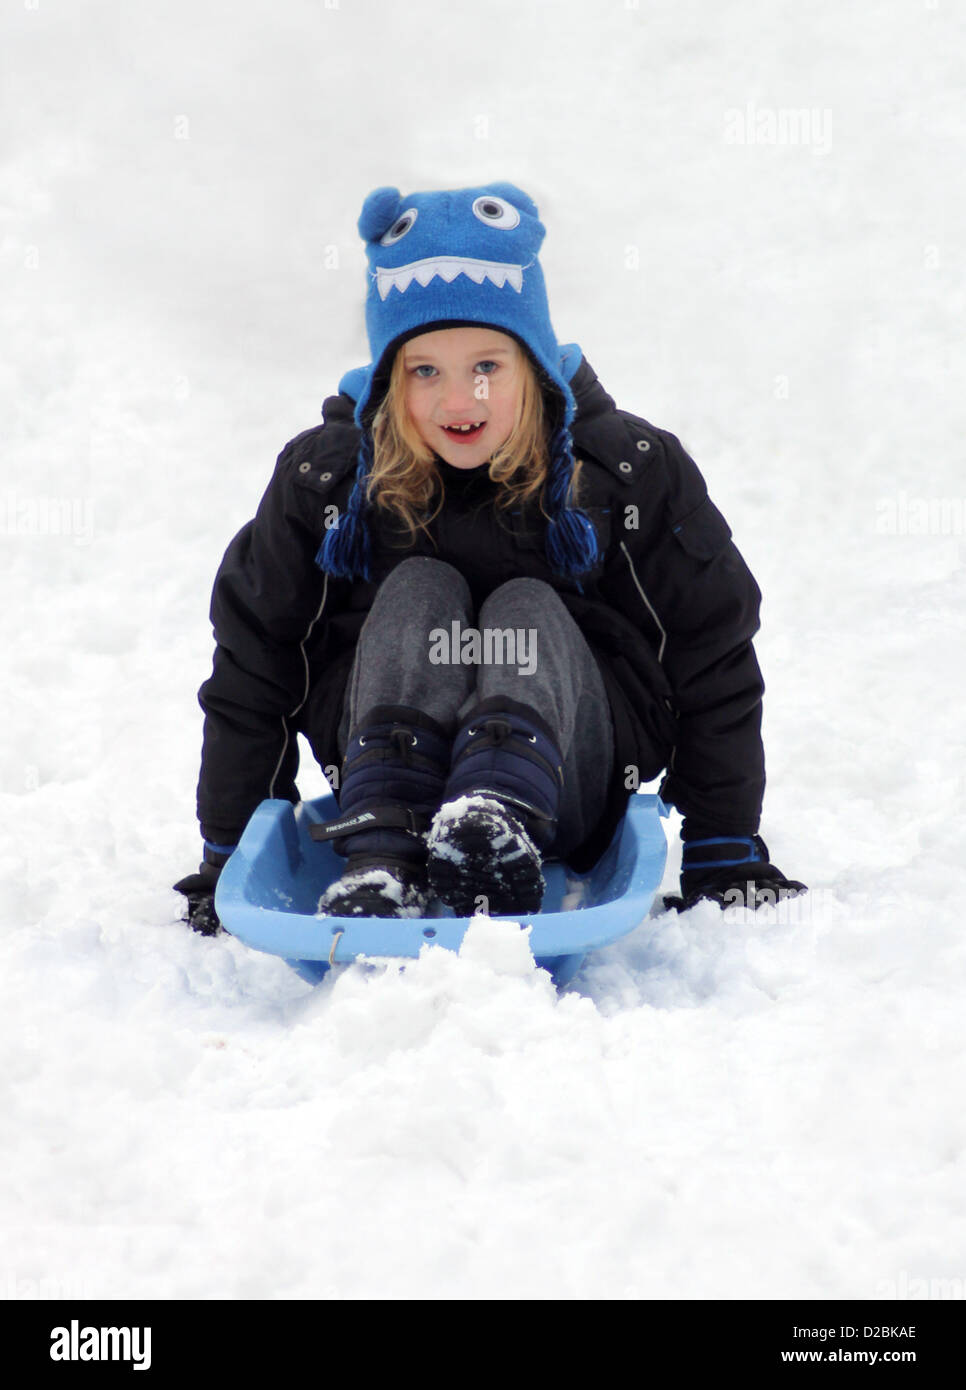 19/01/2013, Scarborough, UK. 6 year old Eve Crowdy sleges down a hill on her toboggan with a big smile. Stock Photo